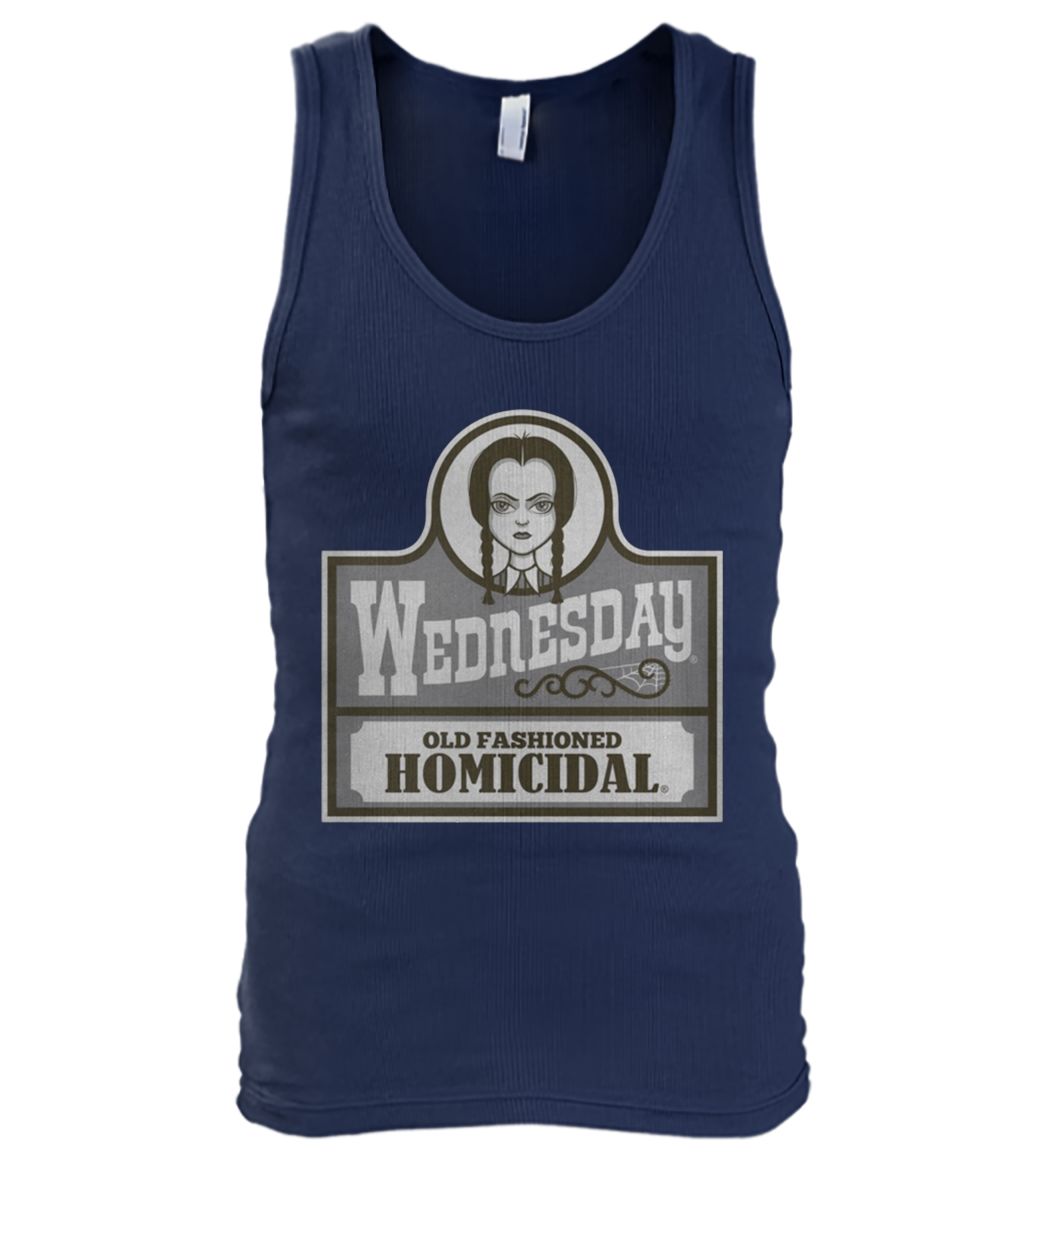 Wednesday old fashioned homicidal men's tank top